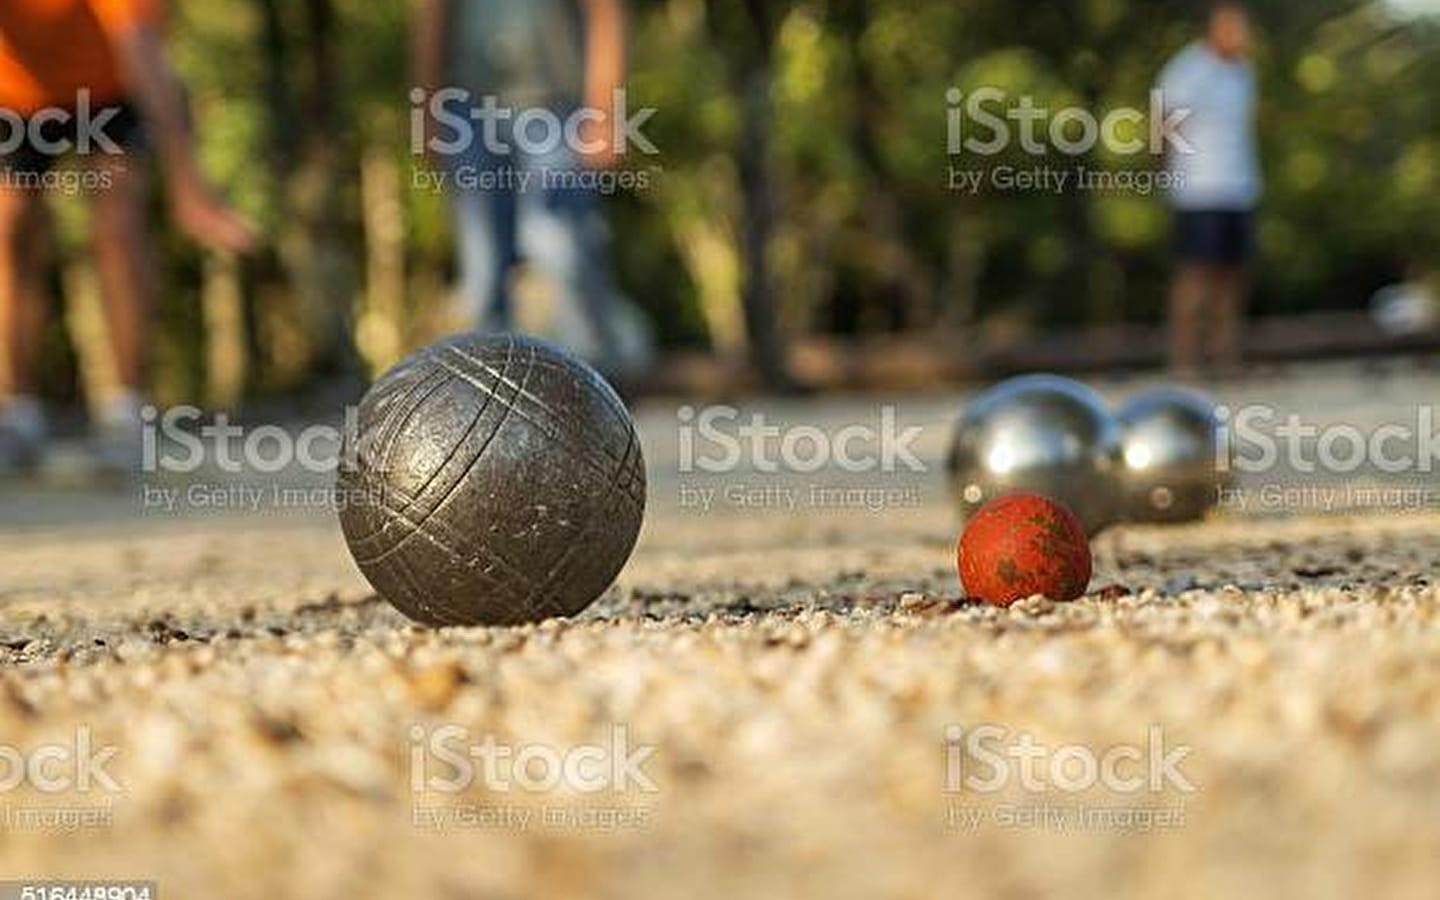 Pétanque - Adapted sport competition